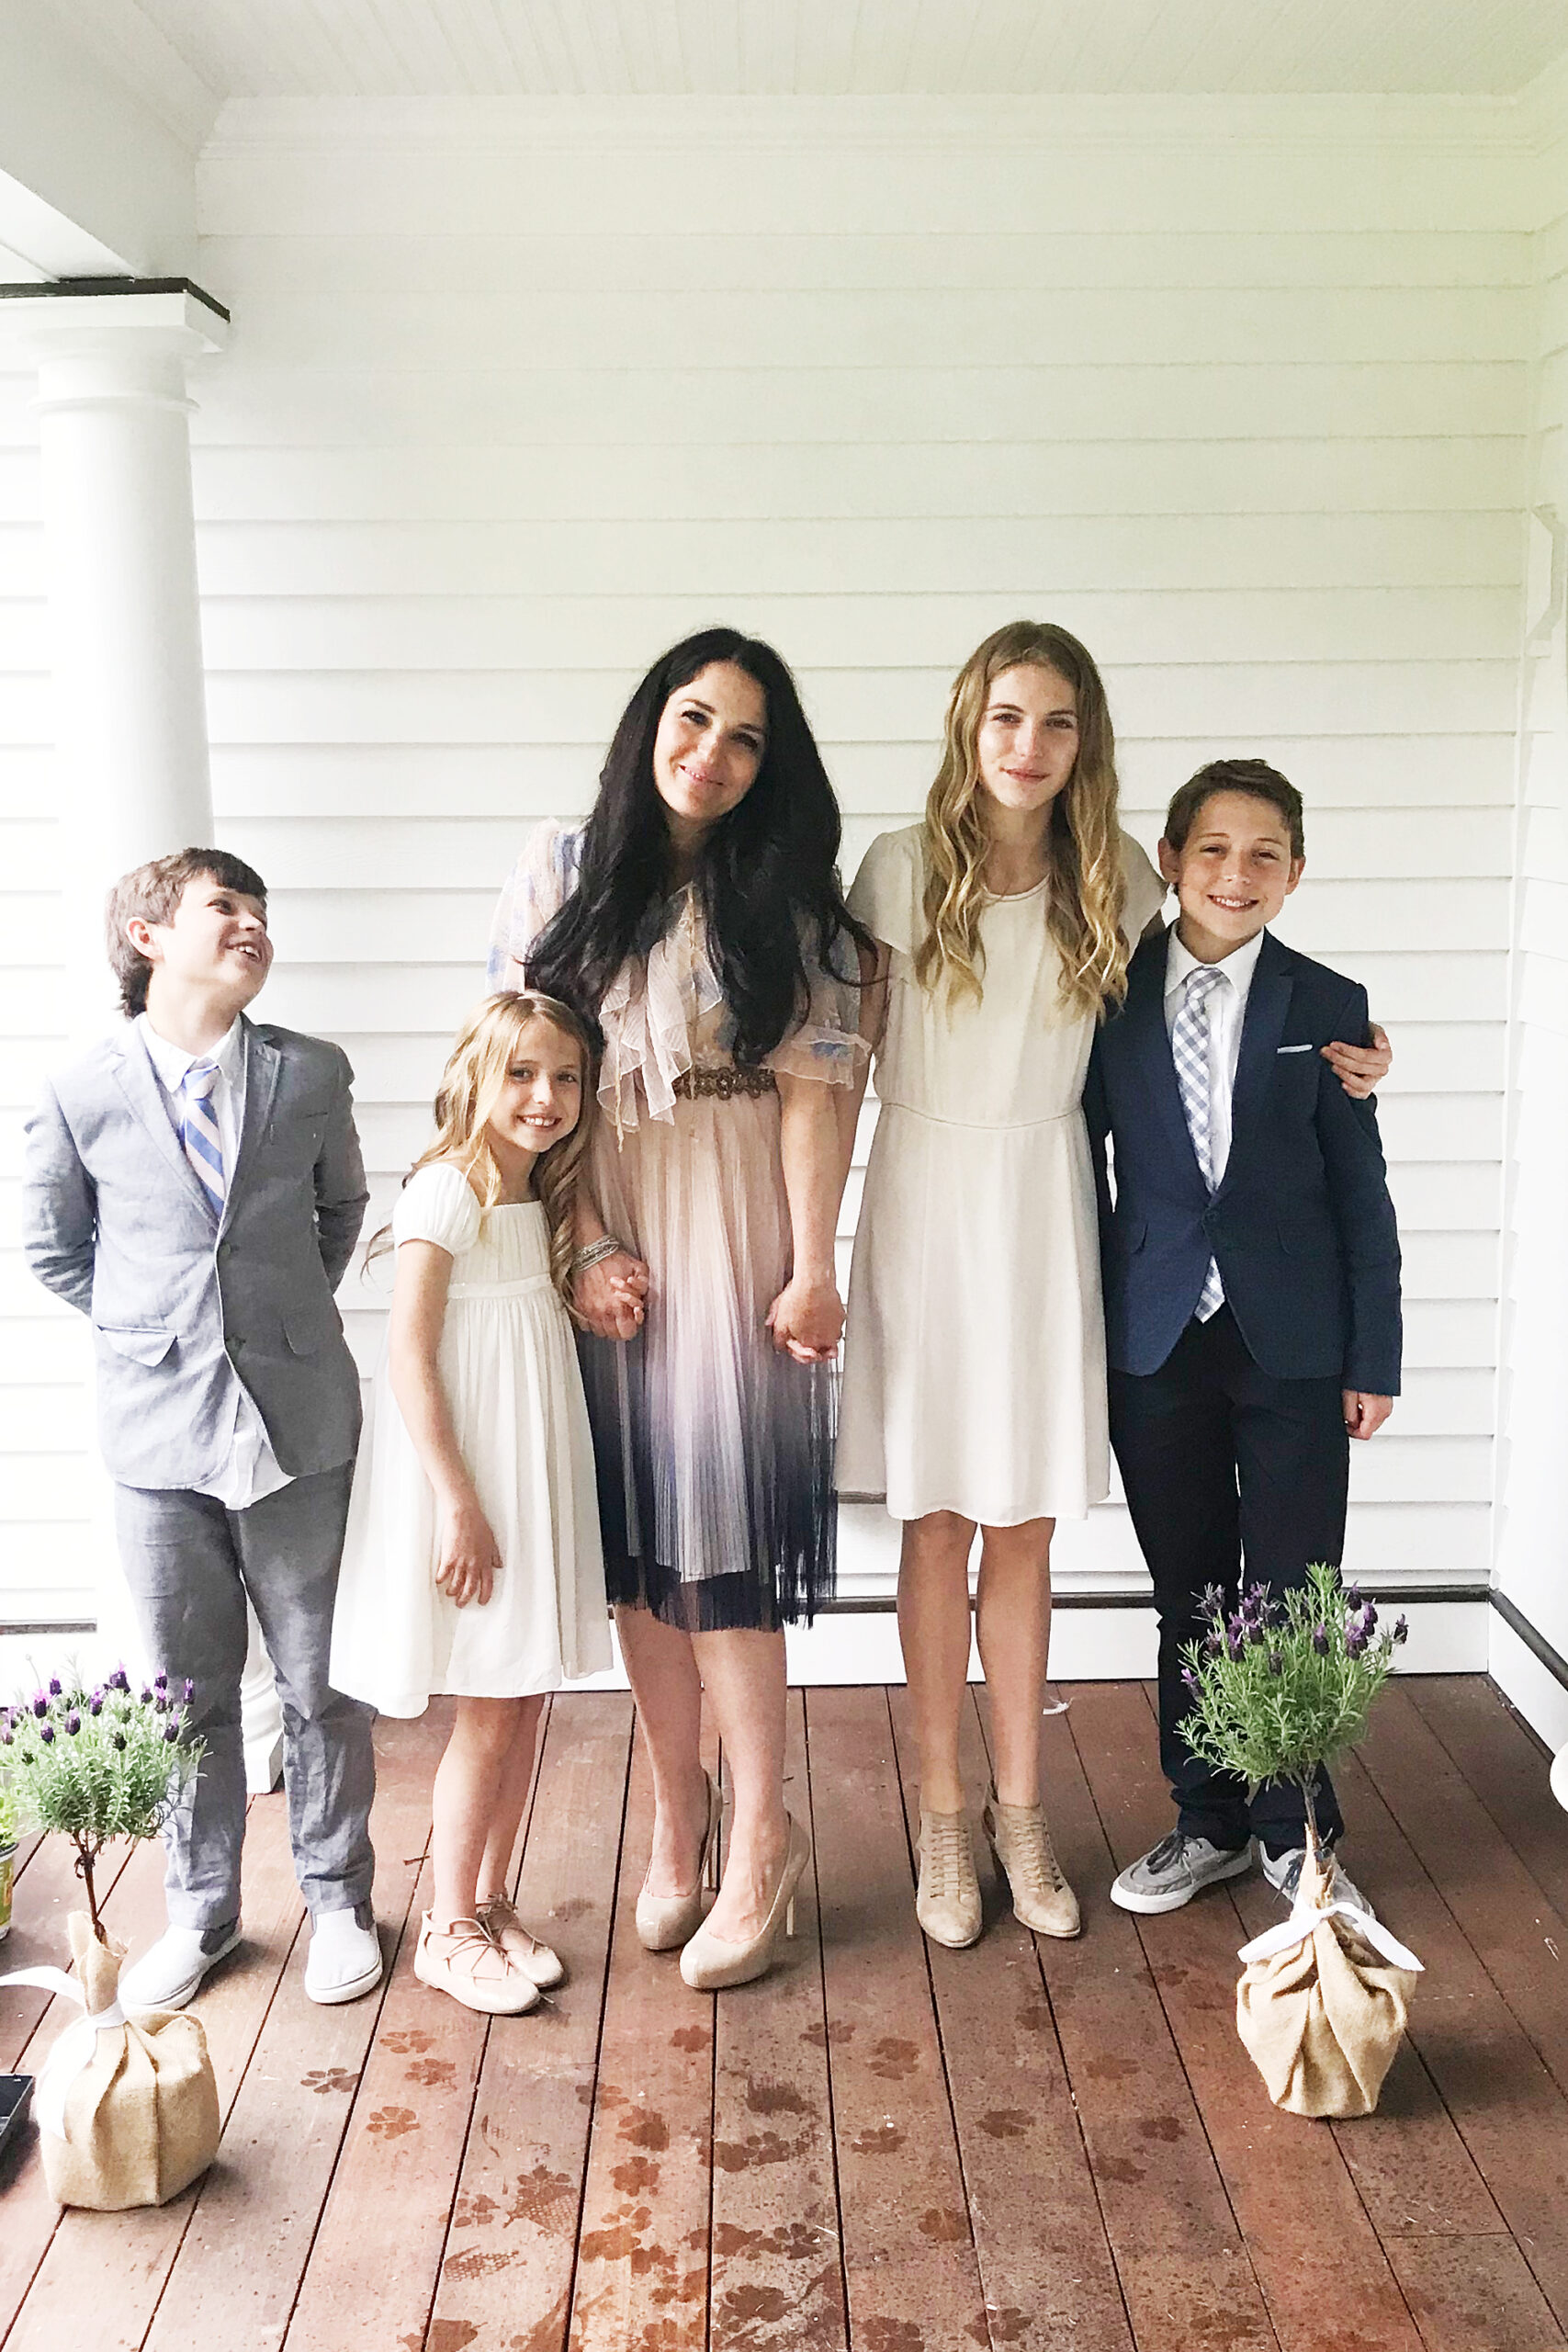 Sharing some of my favorite dress stores for Mother's Day that you can also match with your girls and boys. Perfect for spring also! || Darling Darleen Top CT Lifestyle Blogger #dressstores